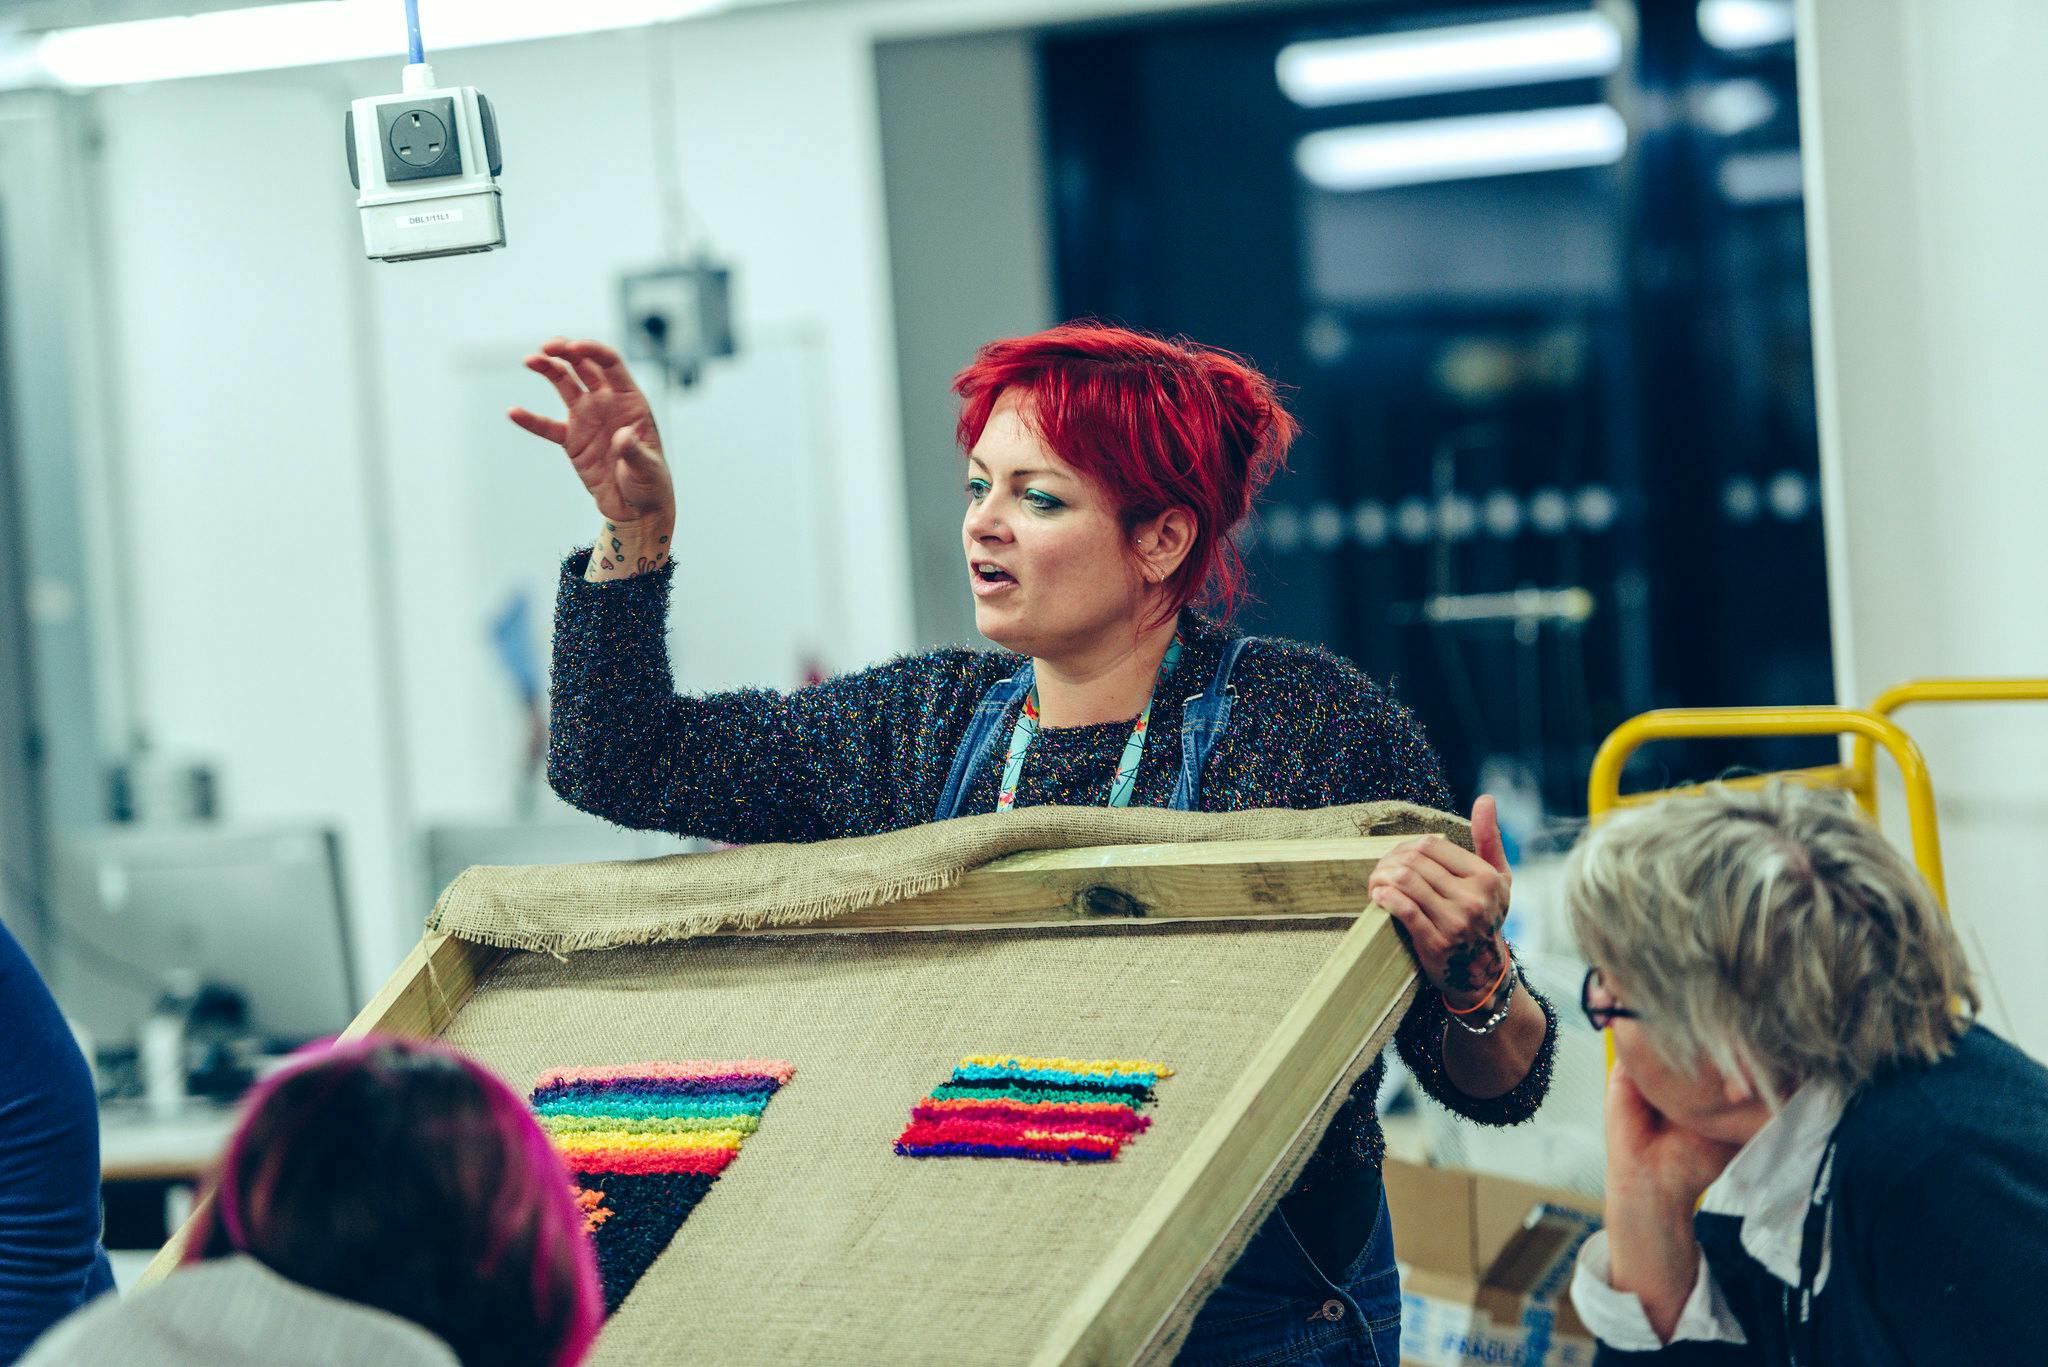 Lecturer Becky Dodman Wainwright teaching on the textile course showing tufting punch needle examples to a group